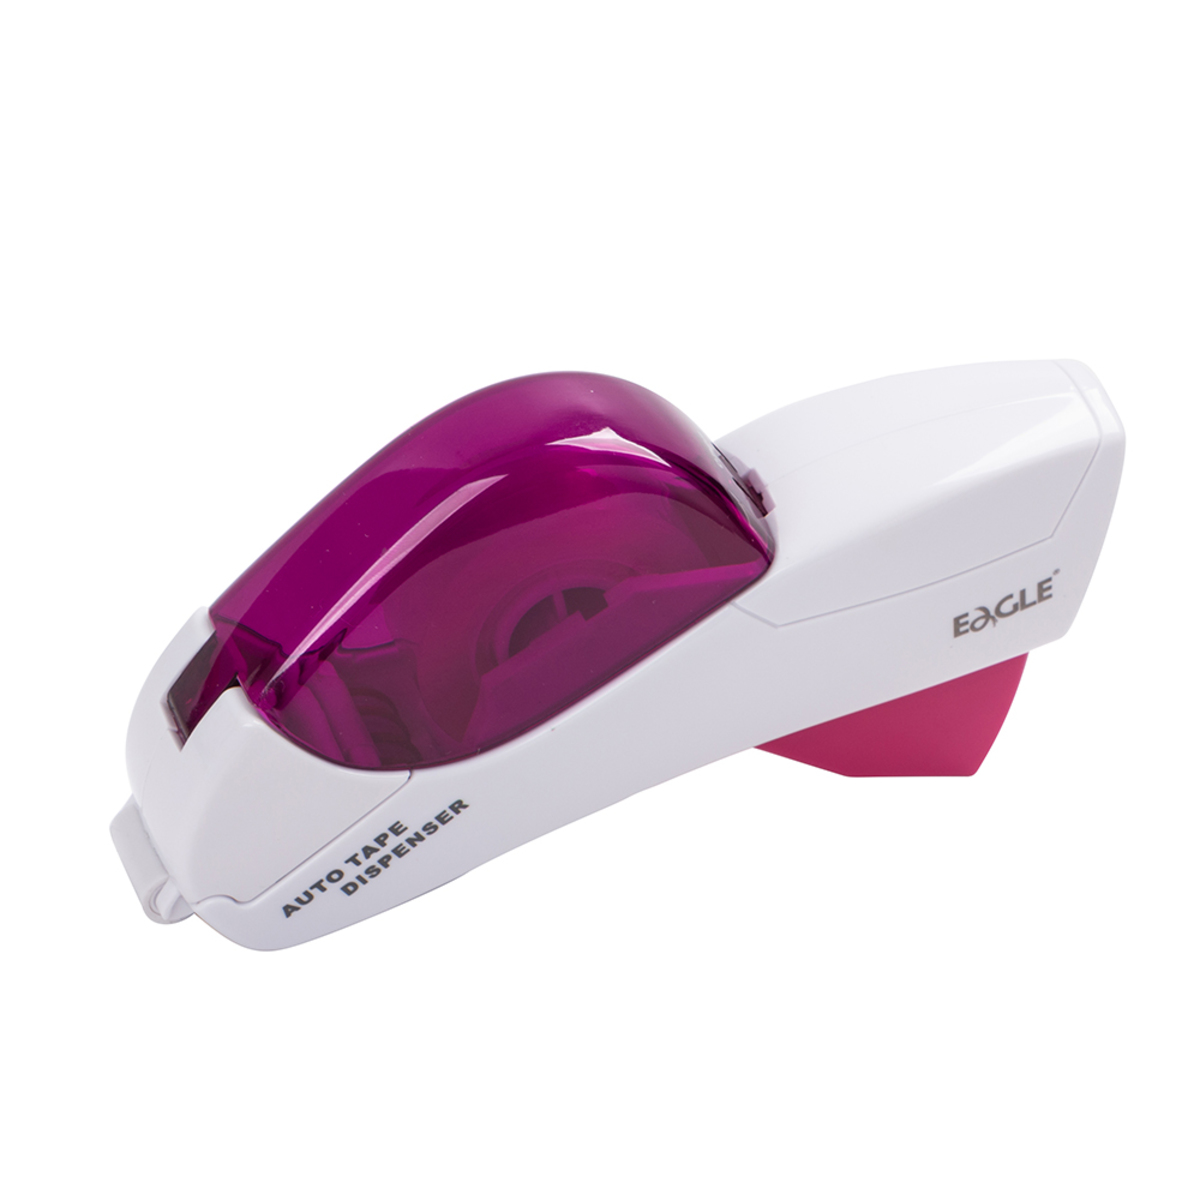 Eagle Automatic Tape Dispenser with -Inch and -Inch Tape, Pink